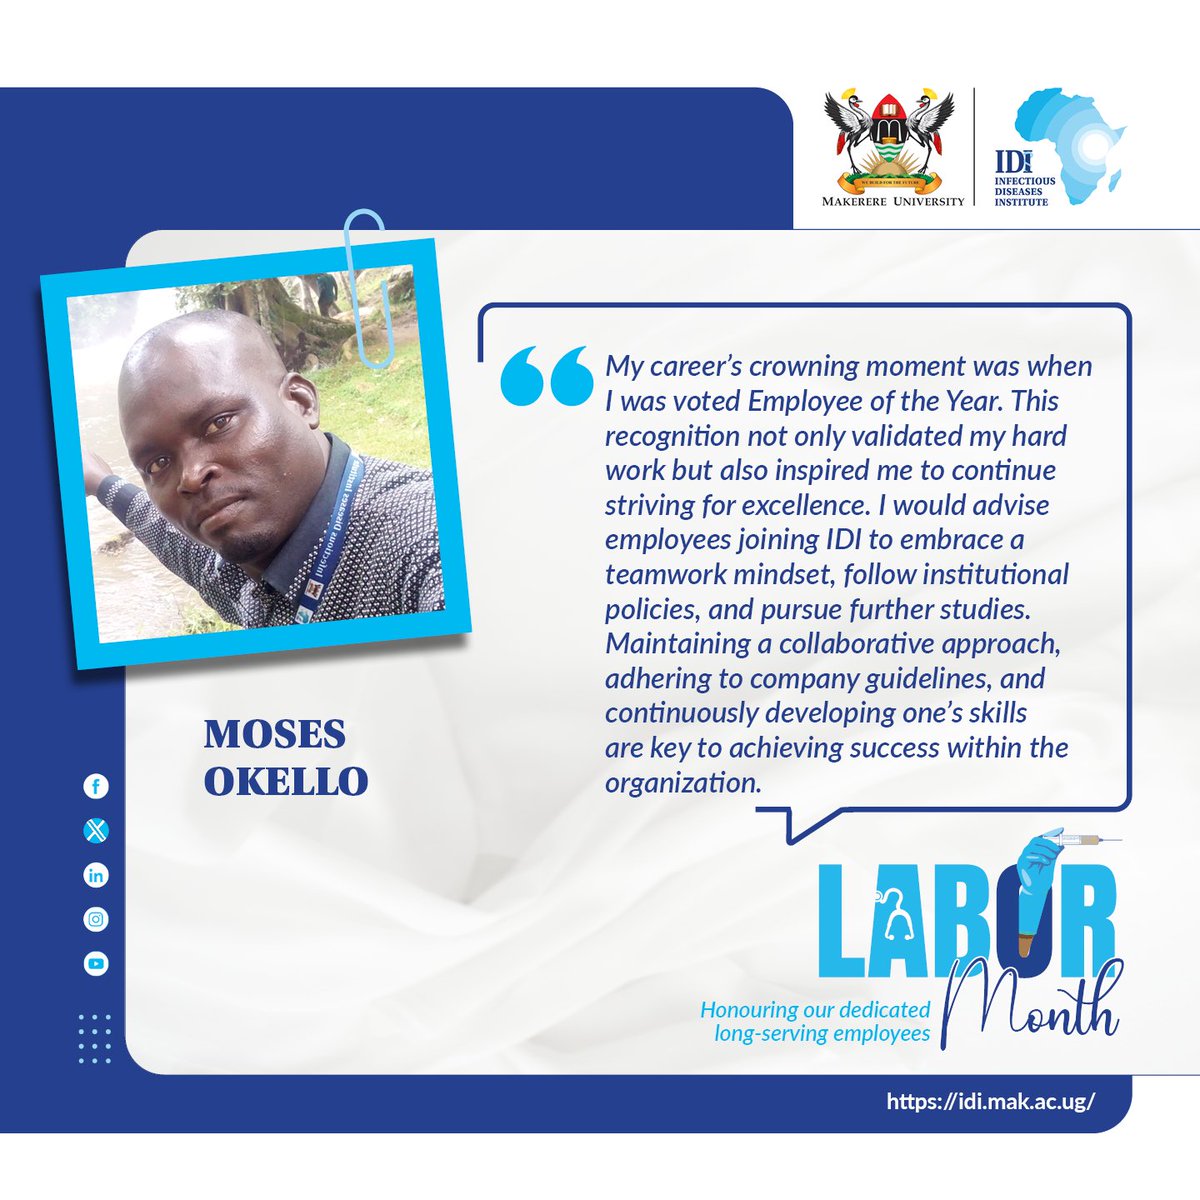 Today, we celebrate Moses Okello, whose career journey from a cleaner to Facilities Assistant at @IDIMakerere exemplifies excellence. Moses oversees a team of maintenance workers, security guards, the estate, and staff welfare. Asante bwana! #OneIDI